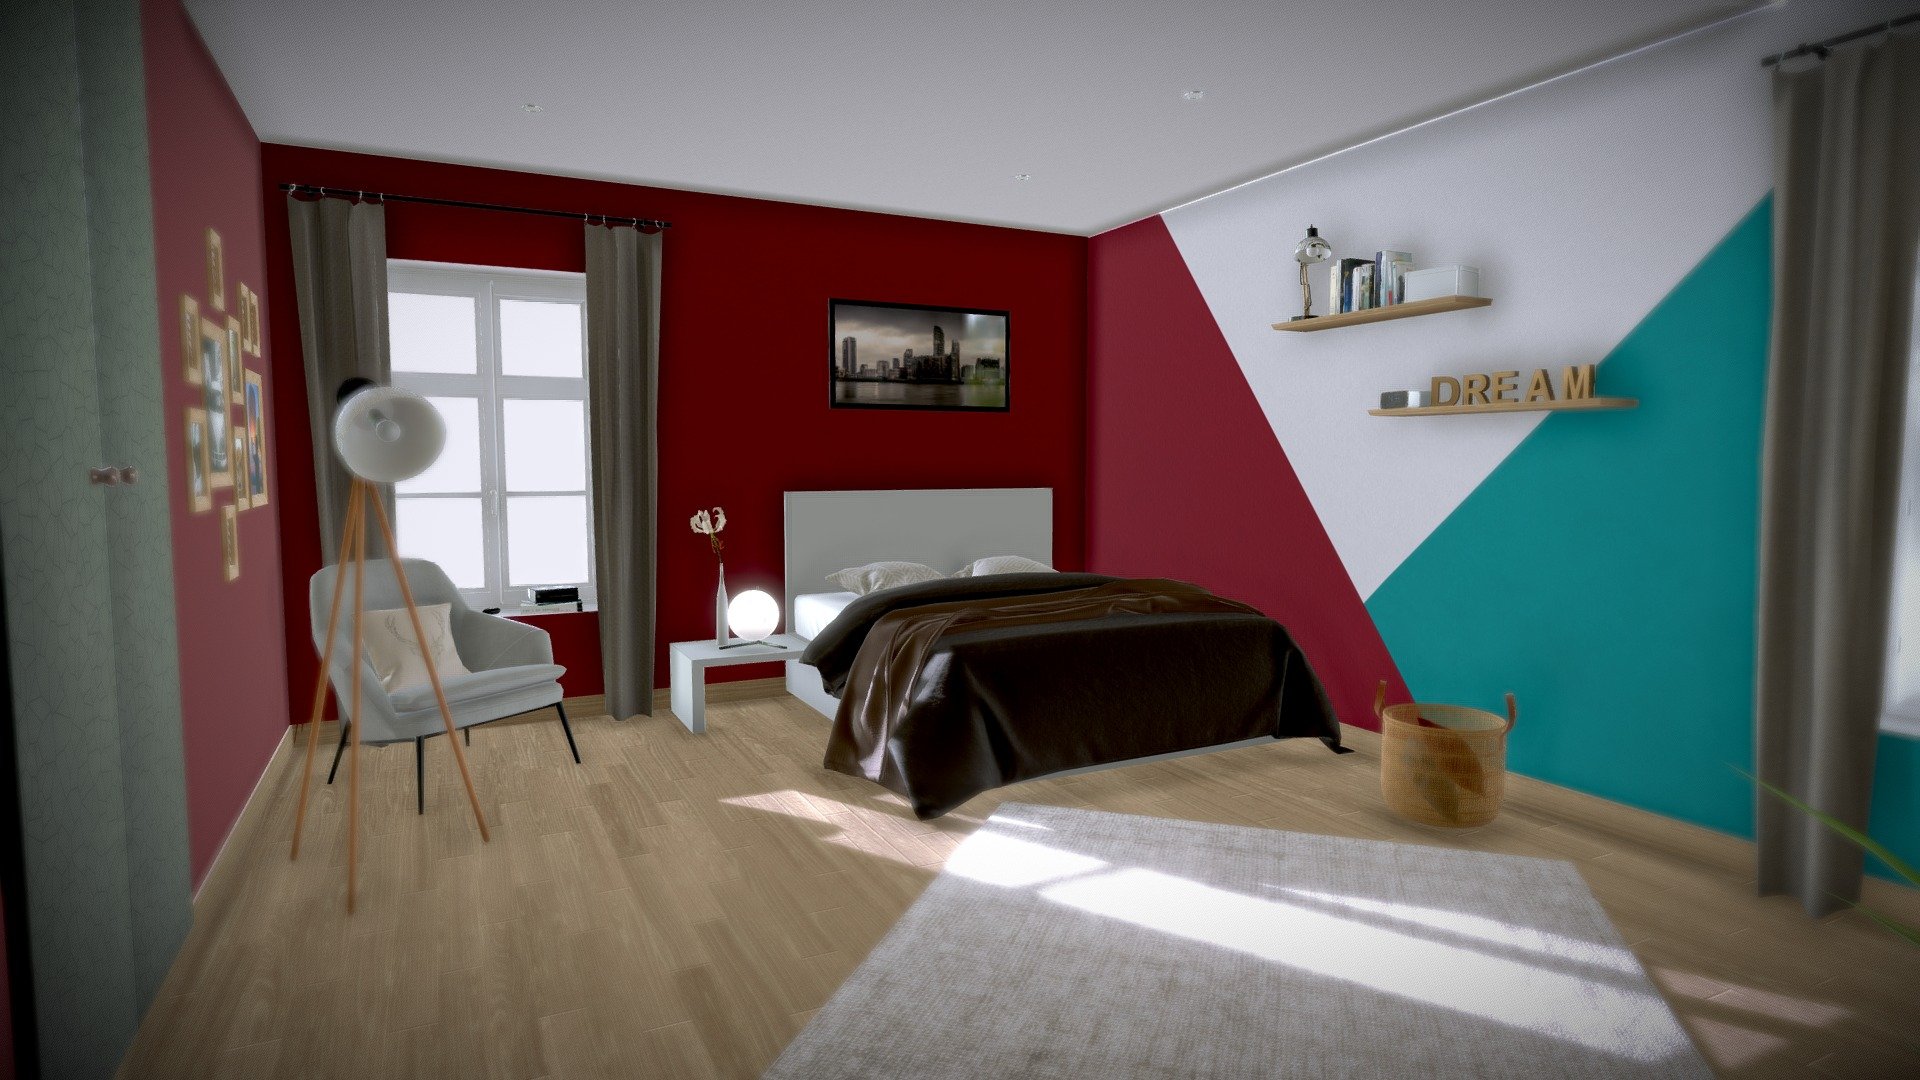 Bedroom test with my assets library 3d model